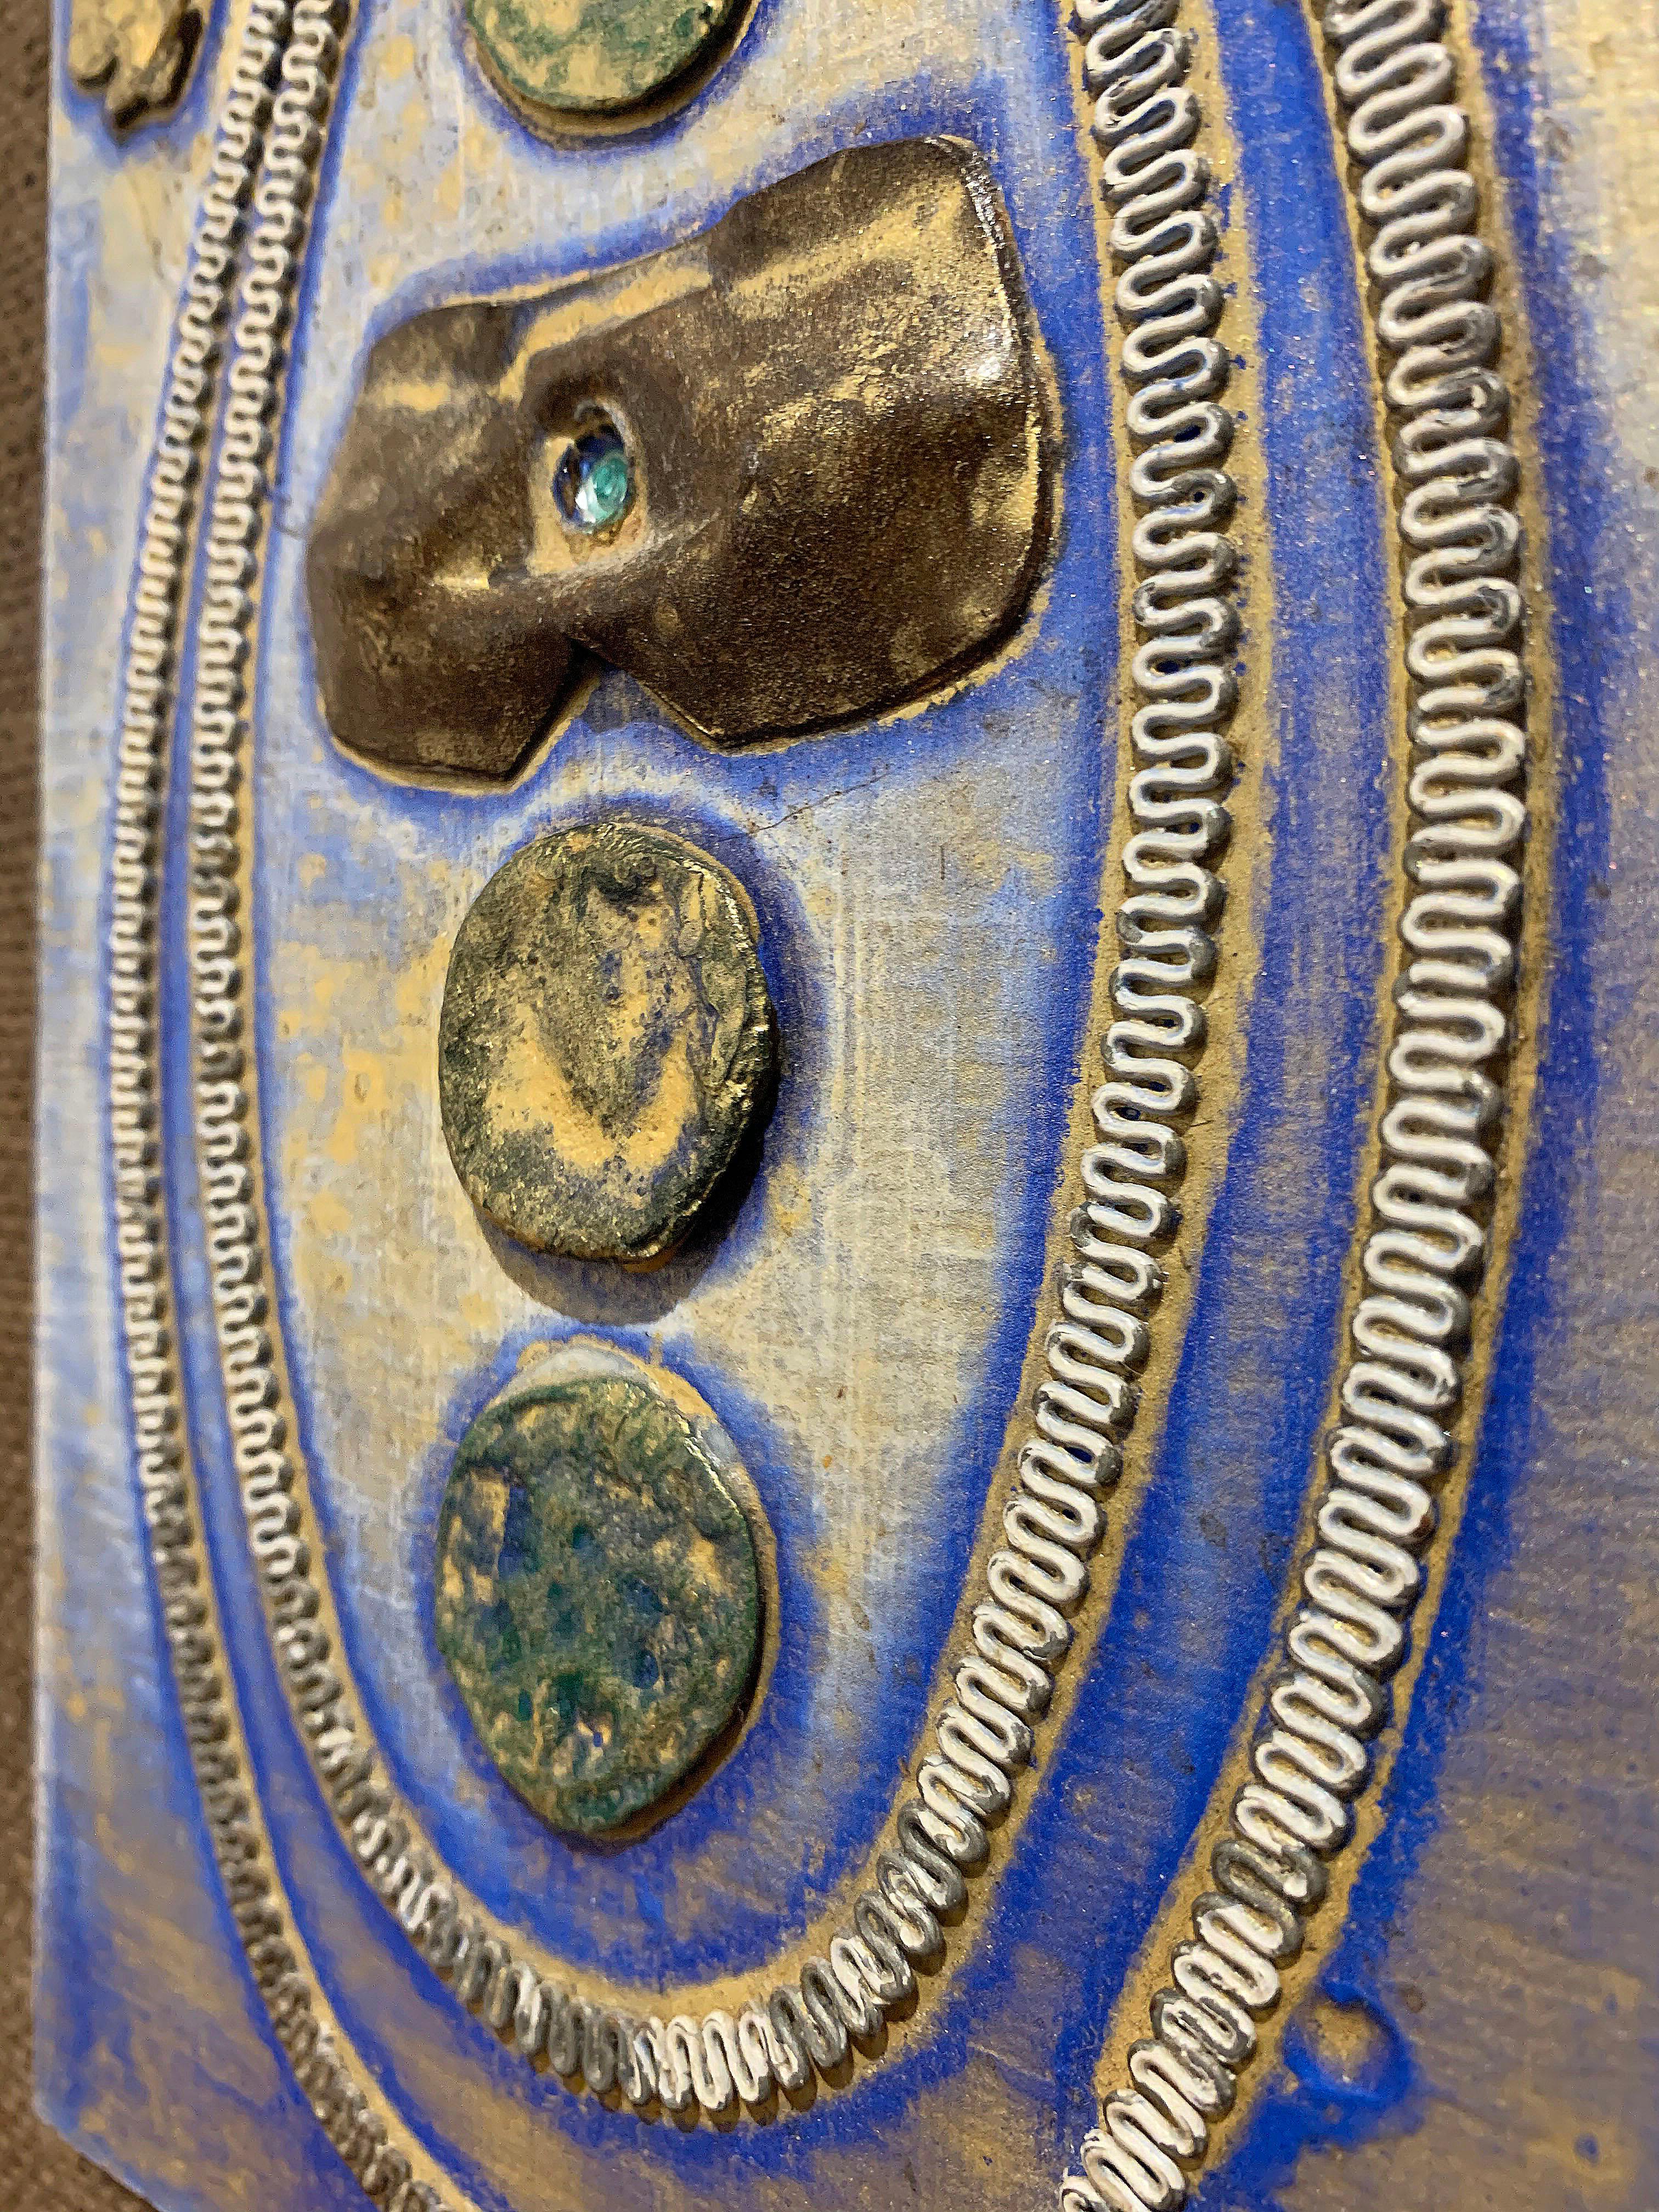 North American Assemblage Metal on Wood Over Burlap, 